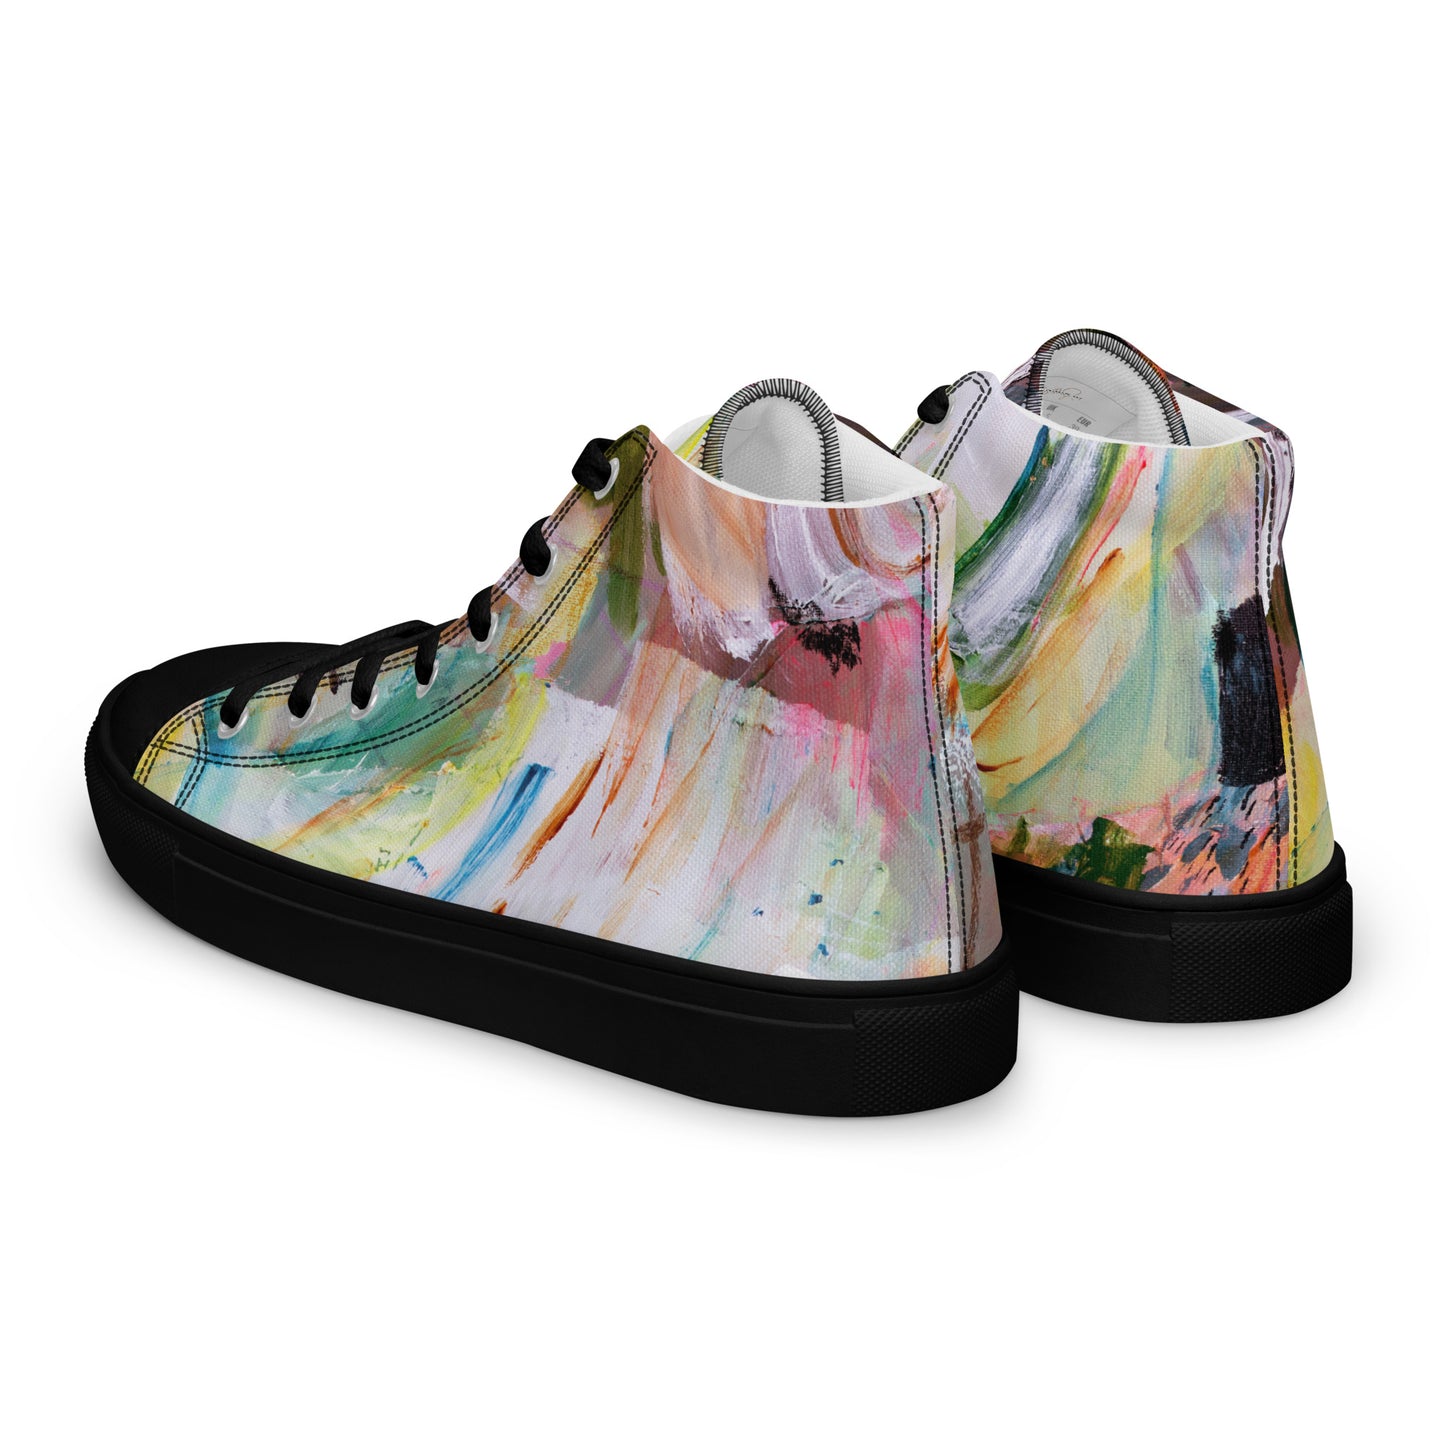 Wandering by Sara Franklin | Women’s high top canvas shoes